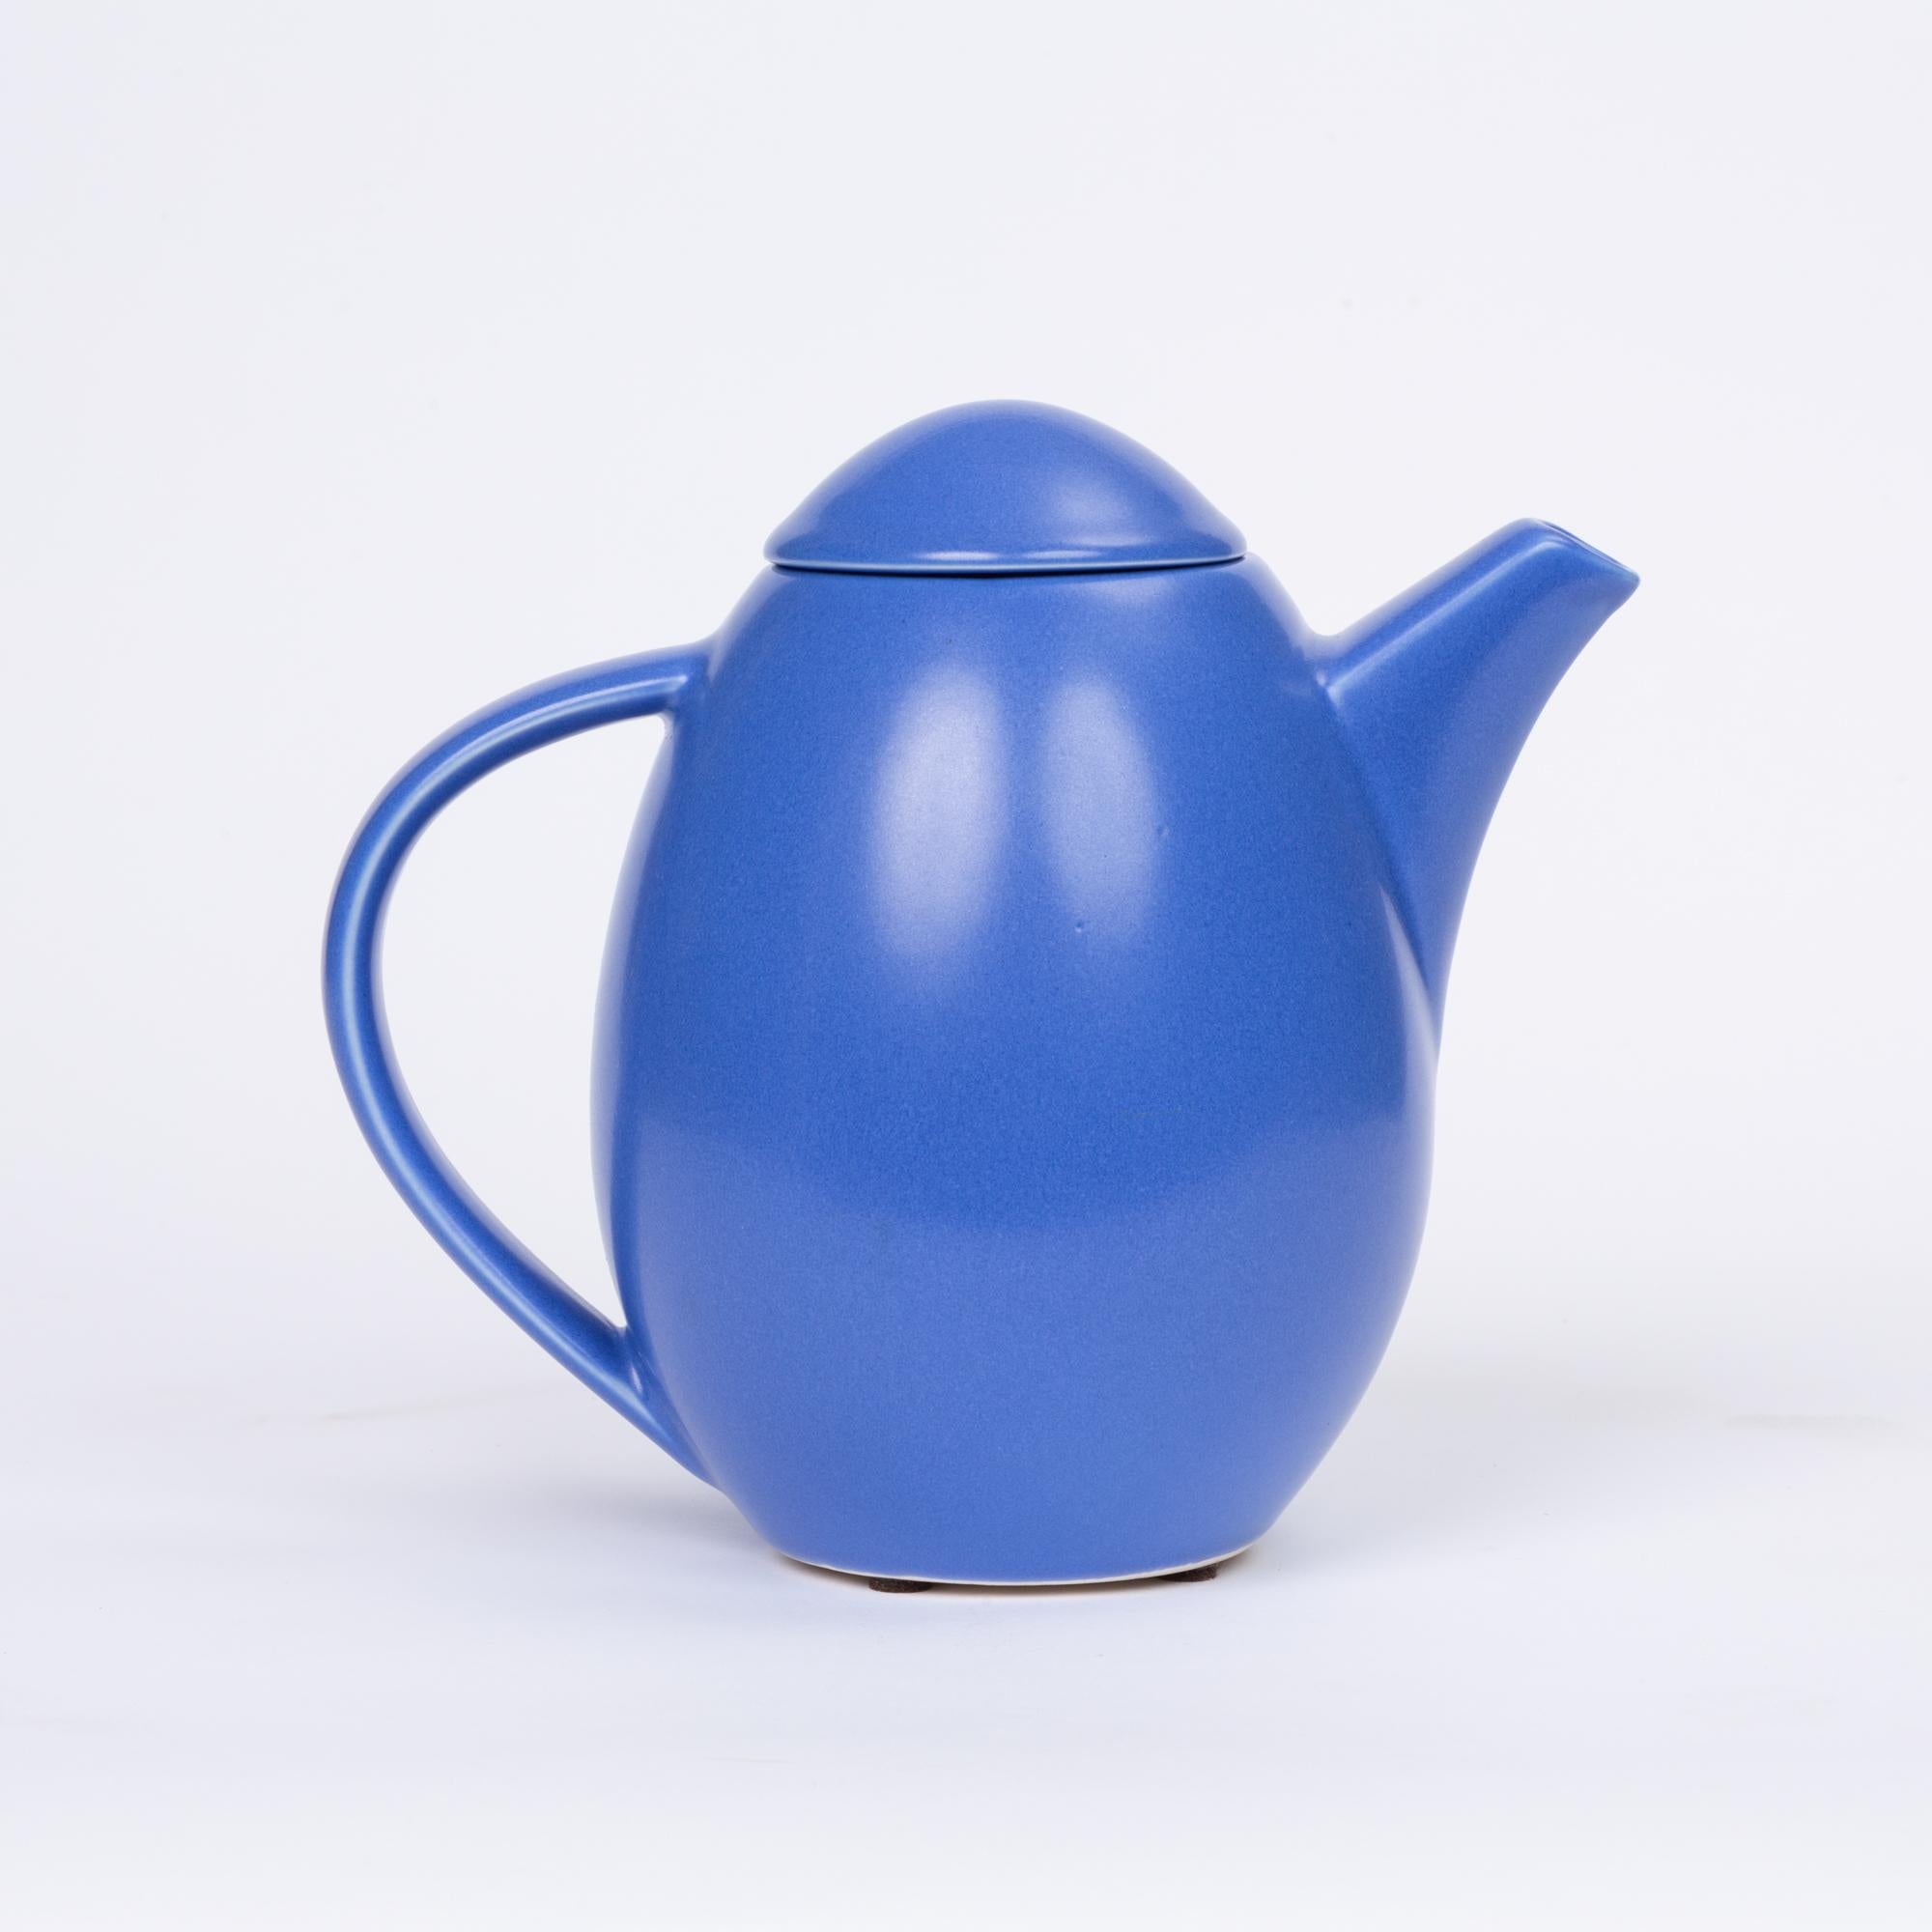 Ceramic teapot by Höganäs Keramik. Such a fun pop of color! This teapot by the notable Swedish dinnerware brand features a soft matte blue glaze that covers the interior and exterior of both the pot and removable top. Such a fun pop of color!

The